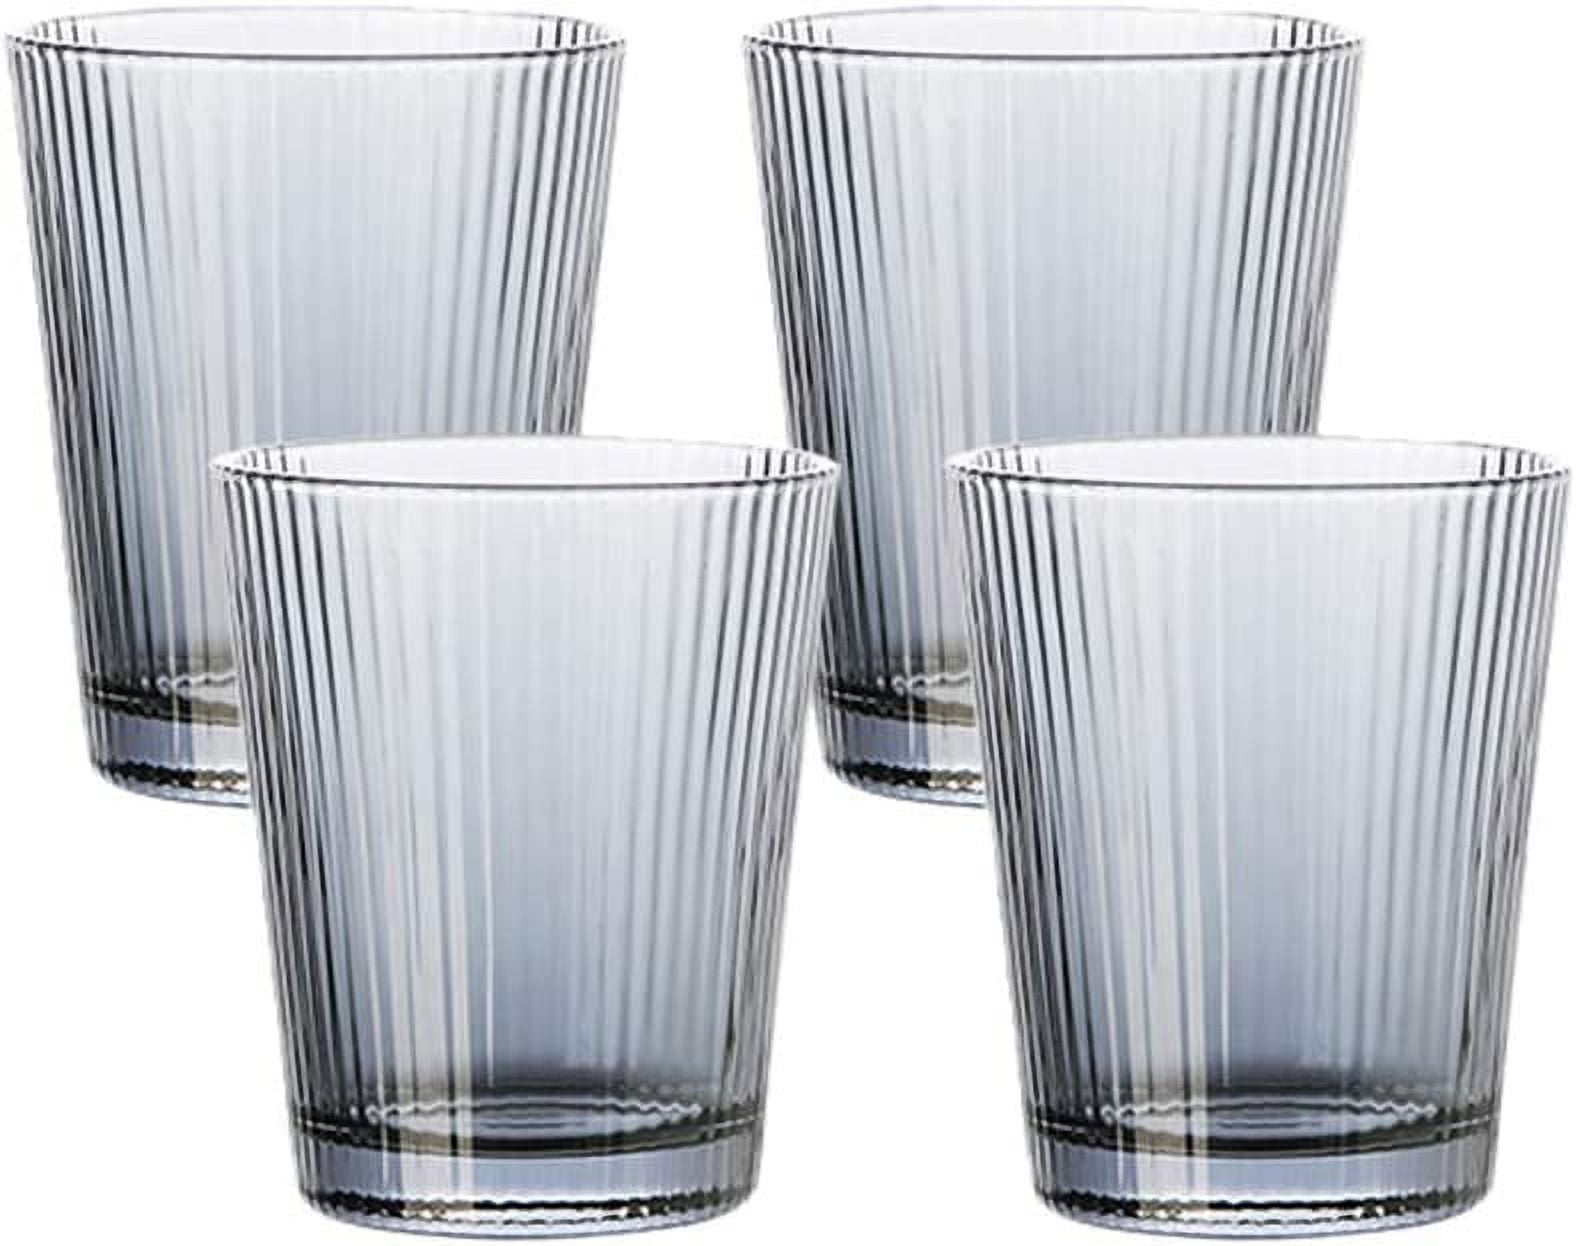 Ribbed Tall Drinking Glasses (Set of 4)  Tall drinking glasses, Drinking  glasses, Mcgee & co